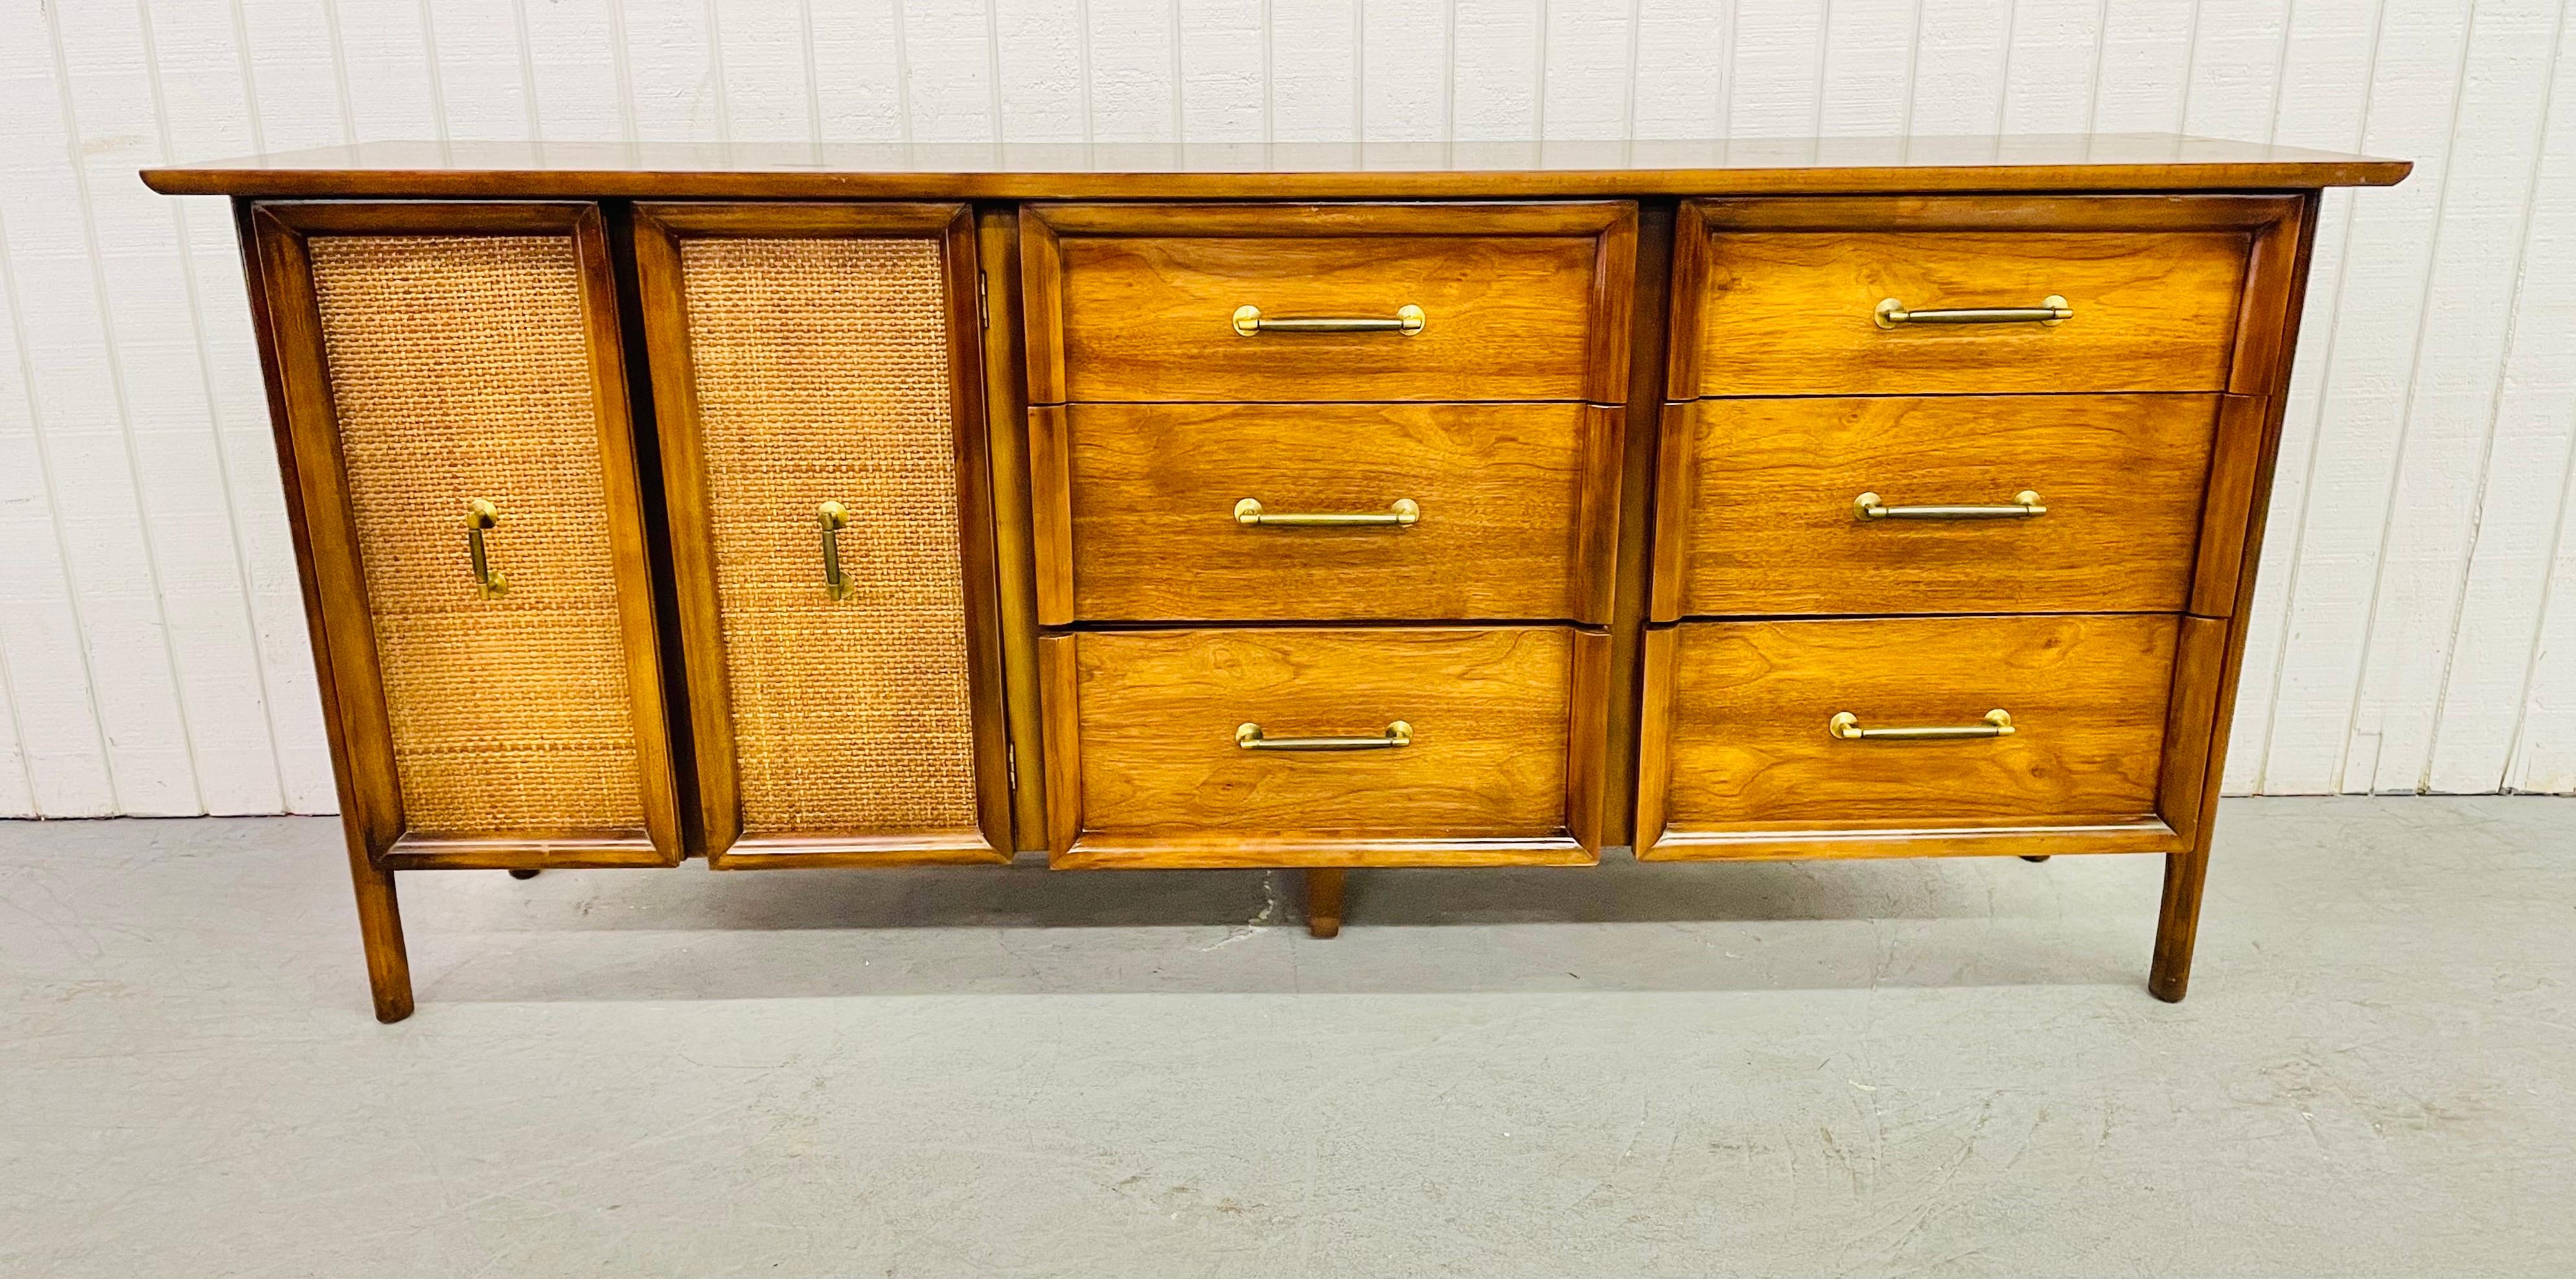 This listing is for a Mid-Century Walnut Triple Dresser. Featuring nine drawers for storage, cane doors on the left that open up to three hidden drawers, six drawers on the right, original hardware, and a beautiful walnut finish.